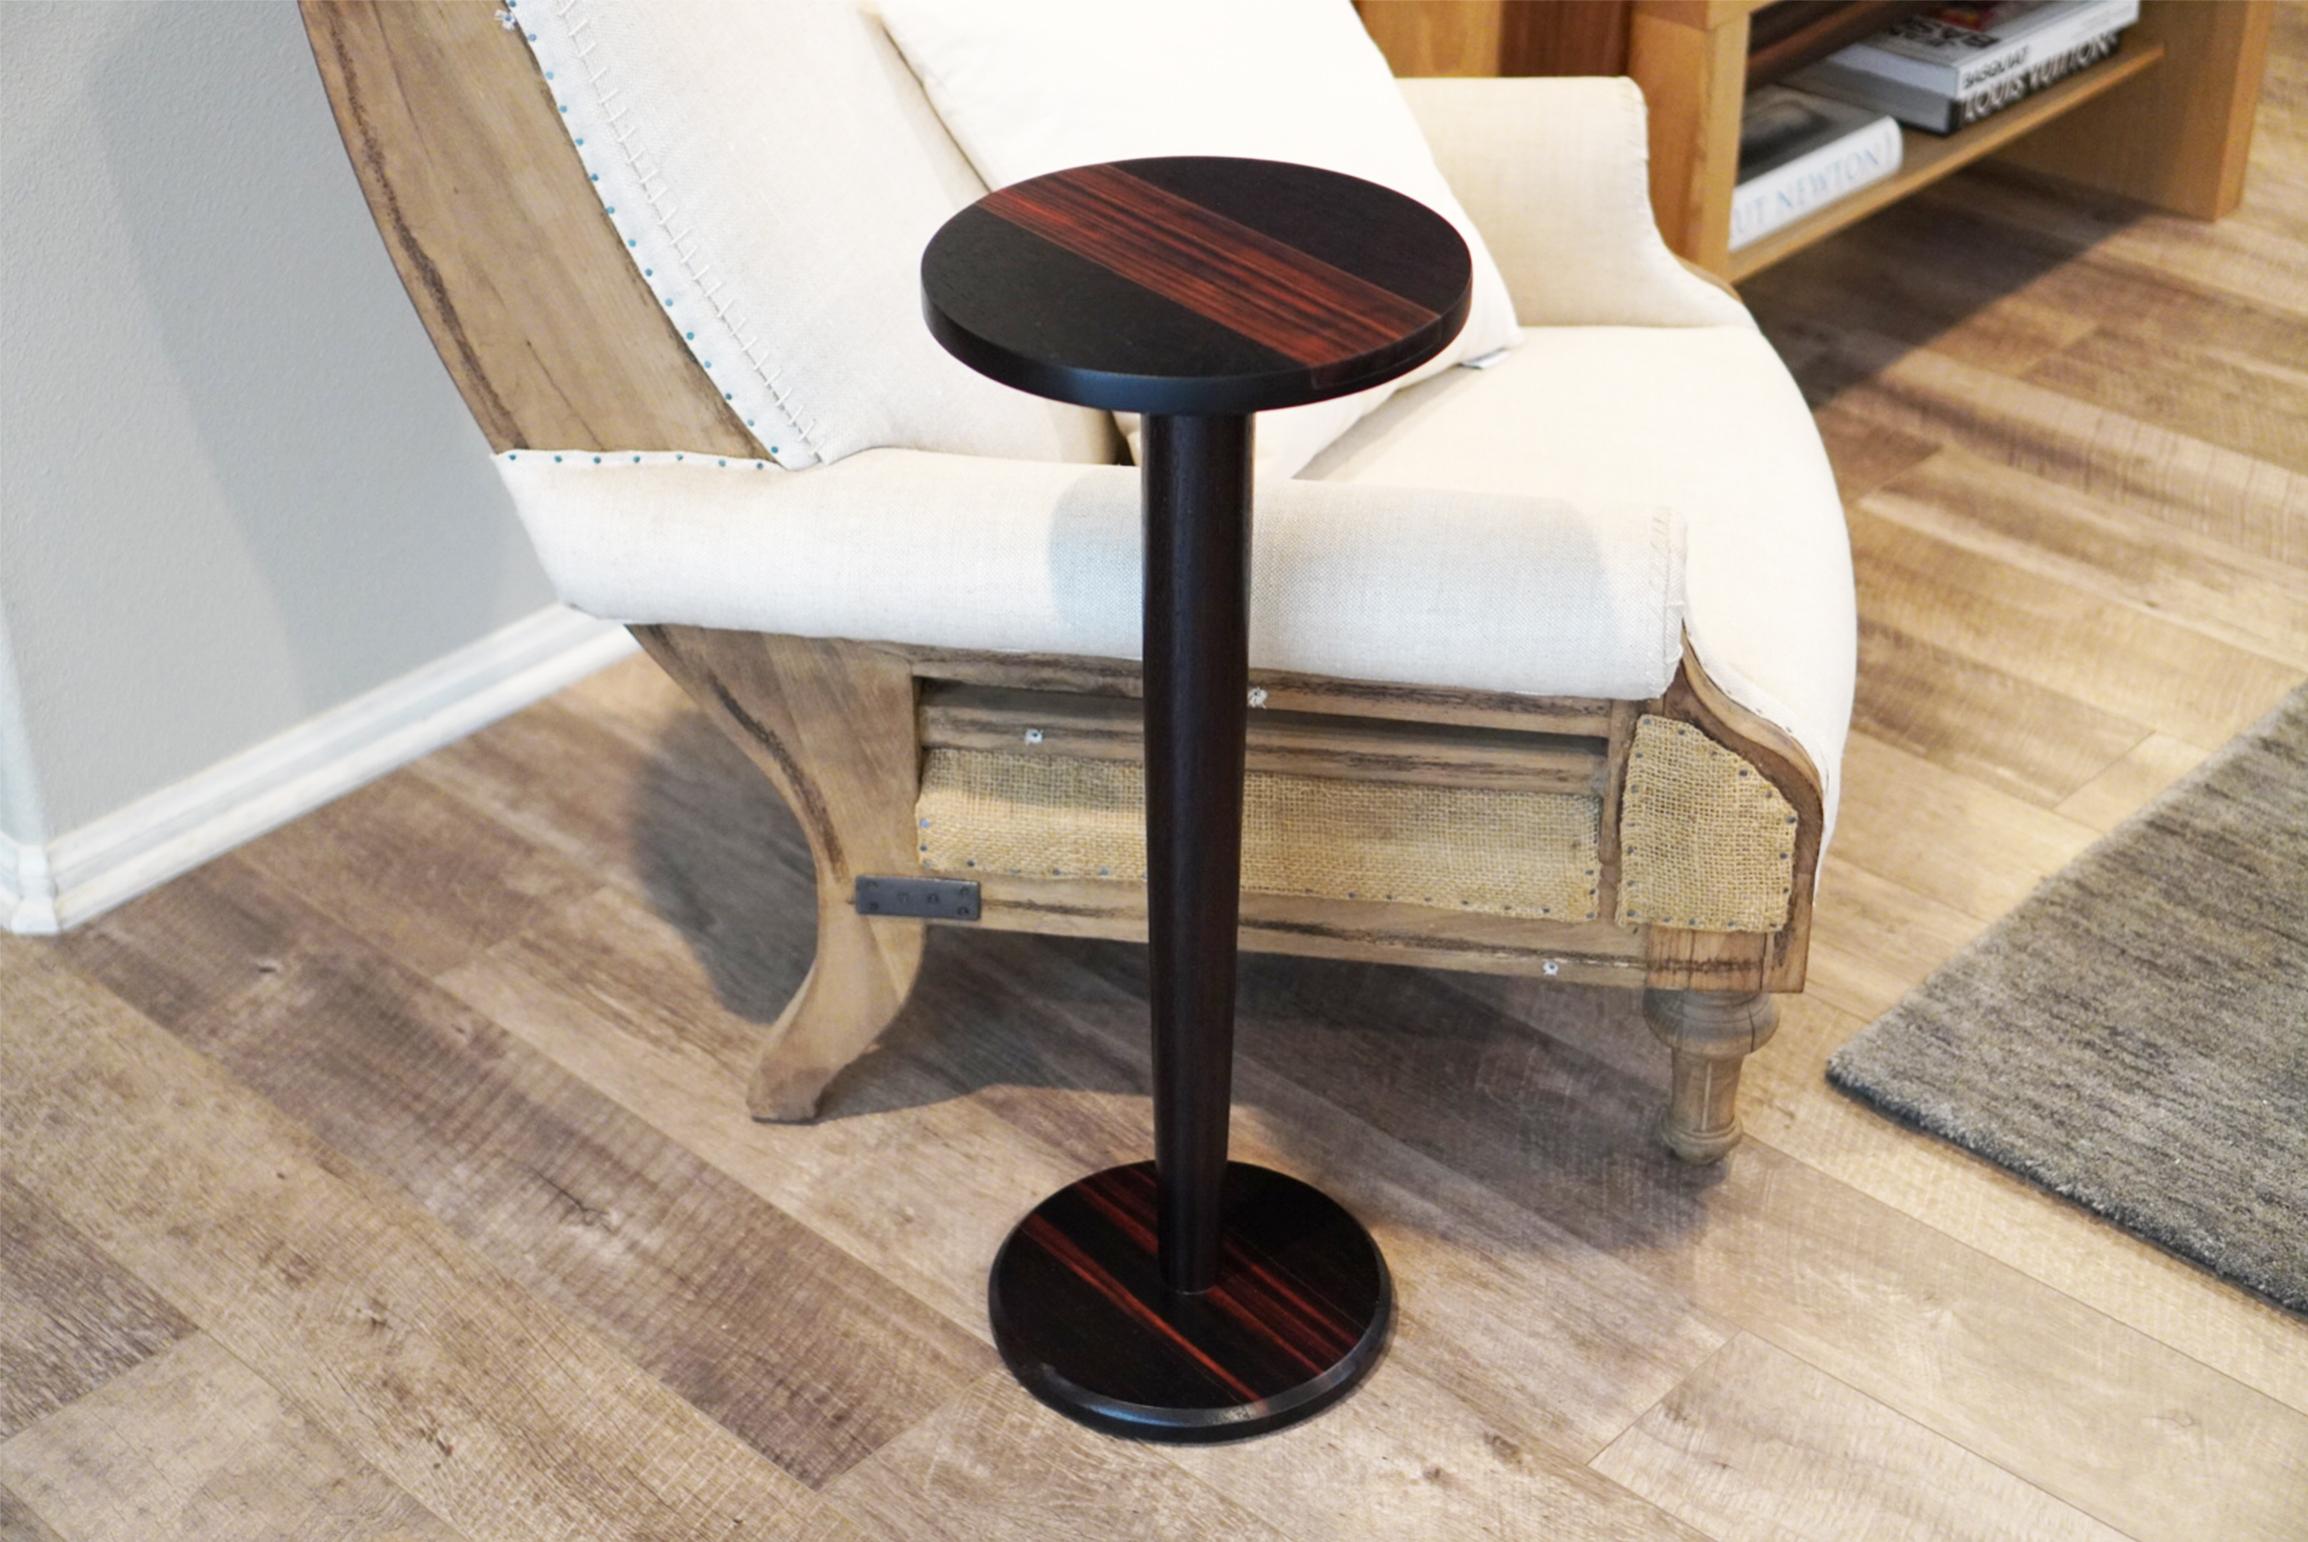 21st Century Mid-Century Modern Inspired Wenge and Macassar Ebony Cocktail Table In New Condition For Sale In Oakhurst, NJ